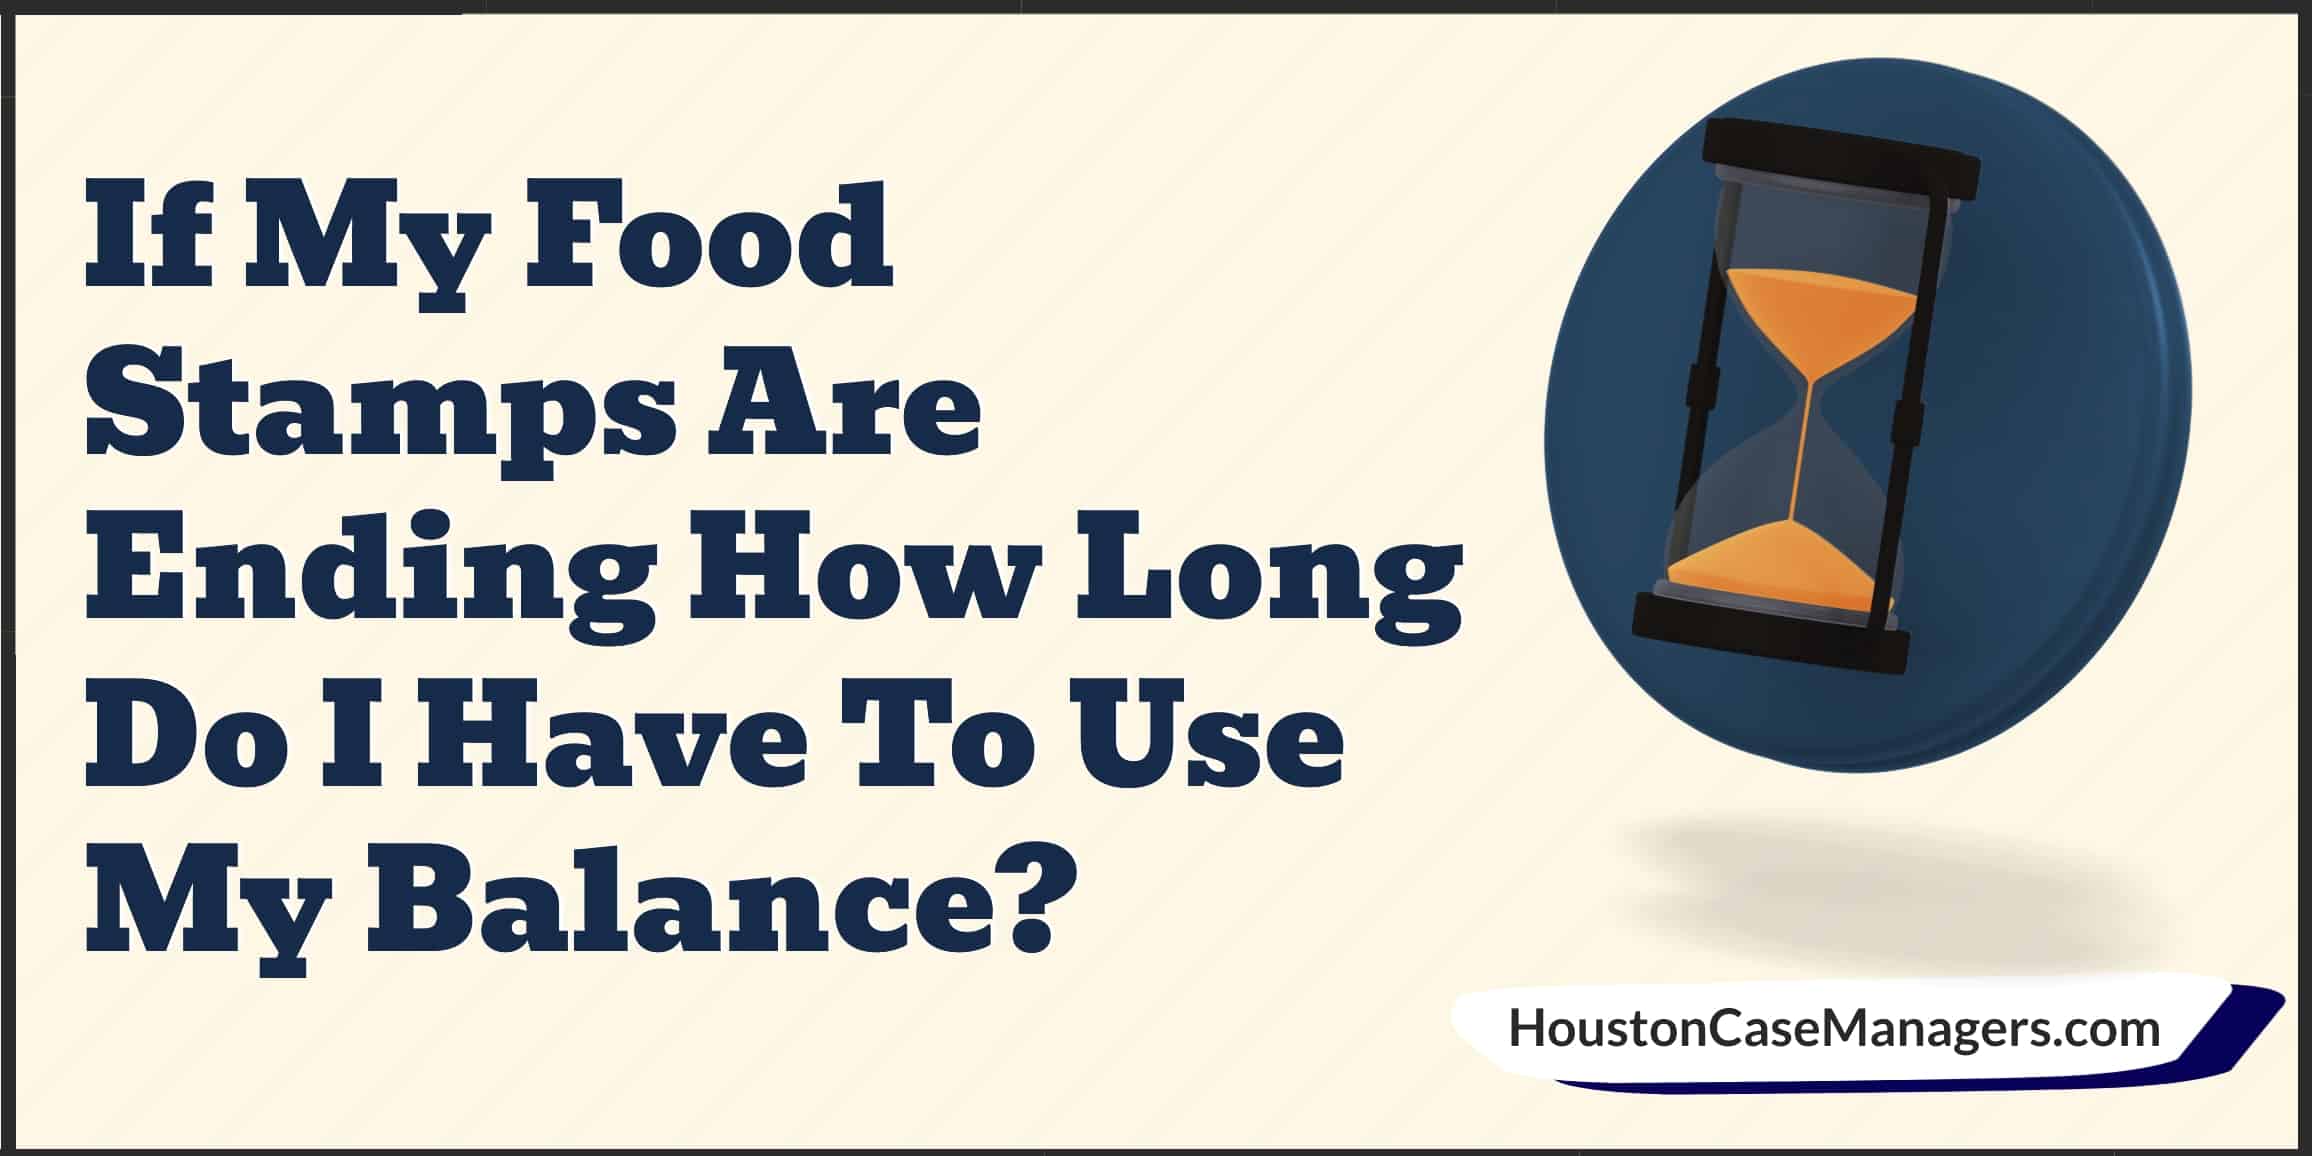 If My Food Stamps Are Ending How Long Do I Have To Use My Balance?